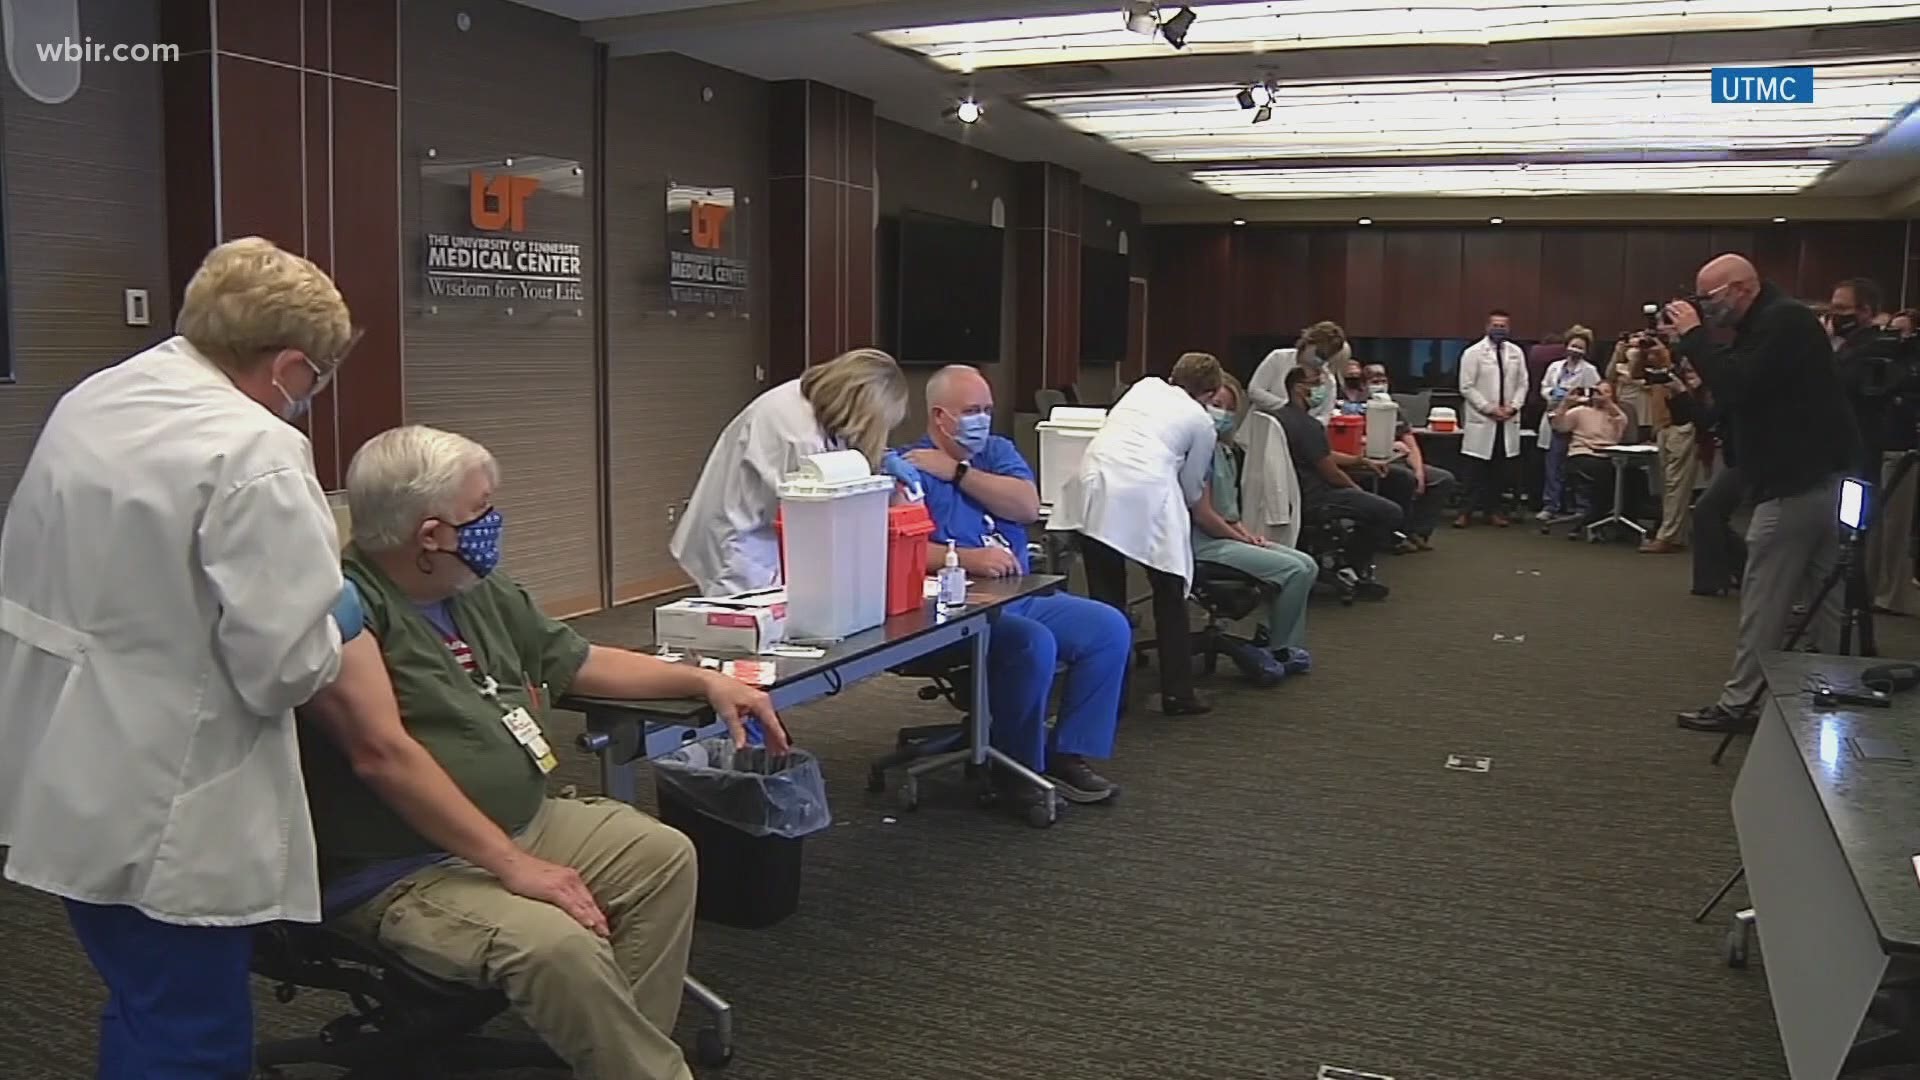 "I got mine!" || UT Medical Center healthcare workers receive historic first COVID-19 vaccine